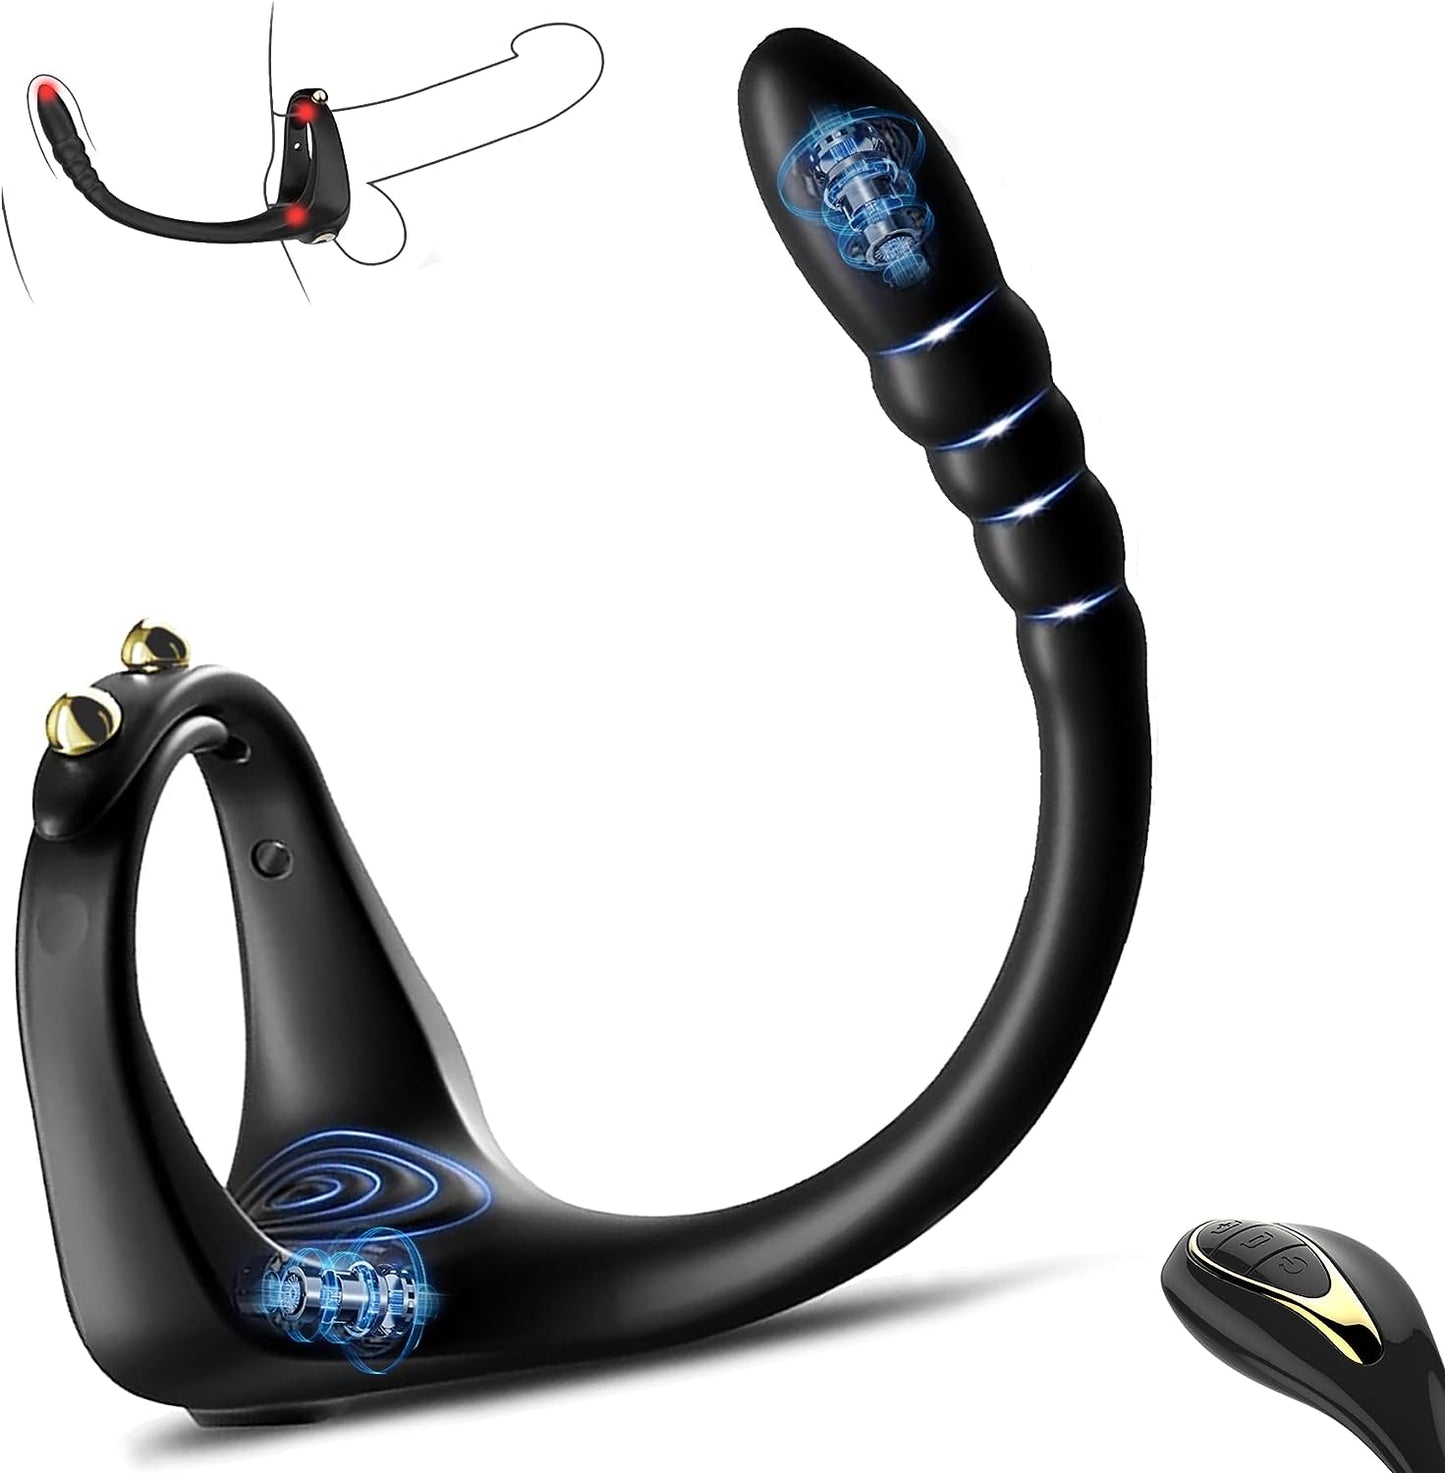 3-in-1 multifunctional vibrator penis ring prostate stimulation with 10 vibration modes 